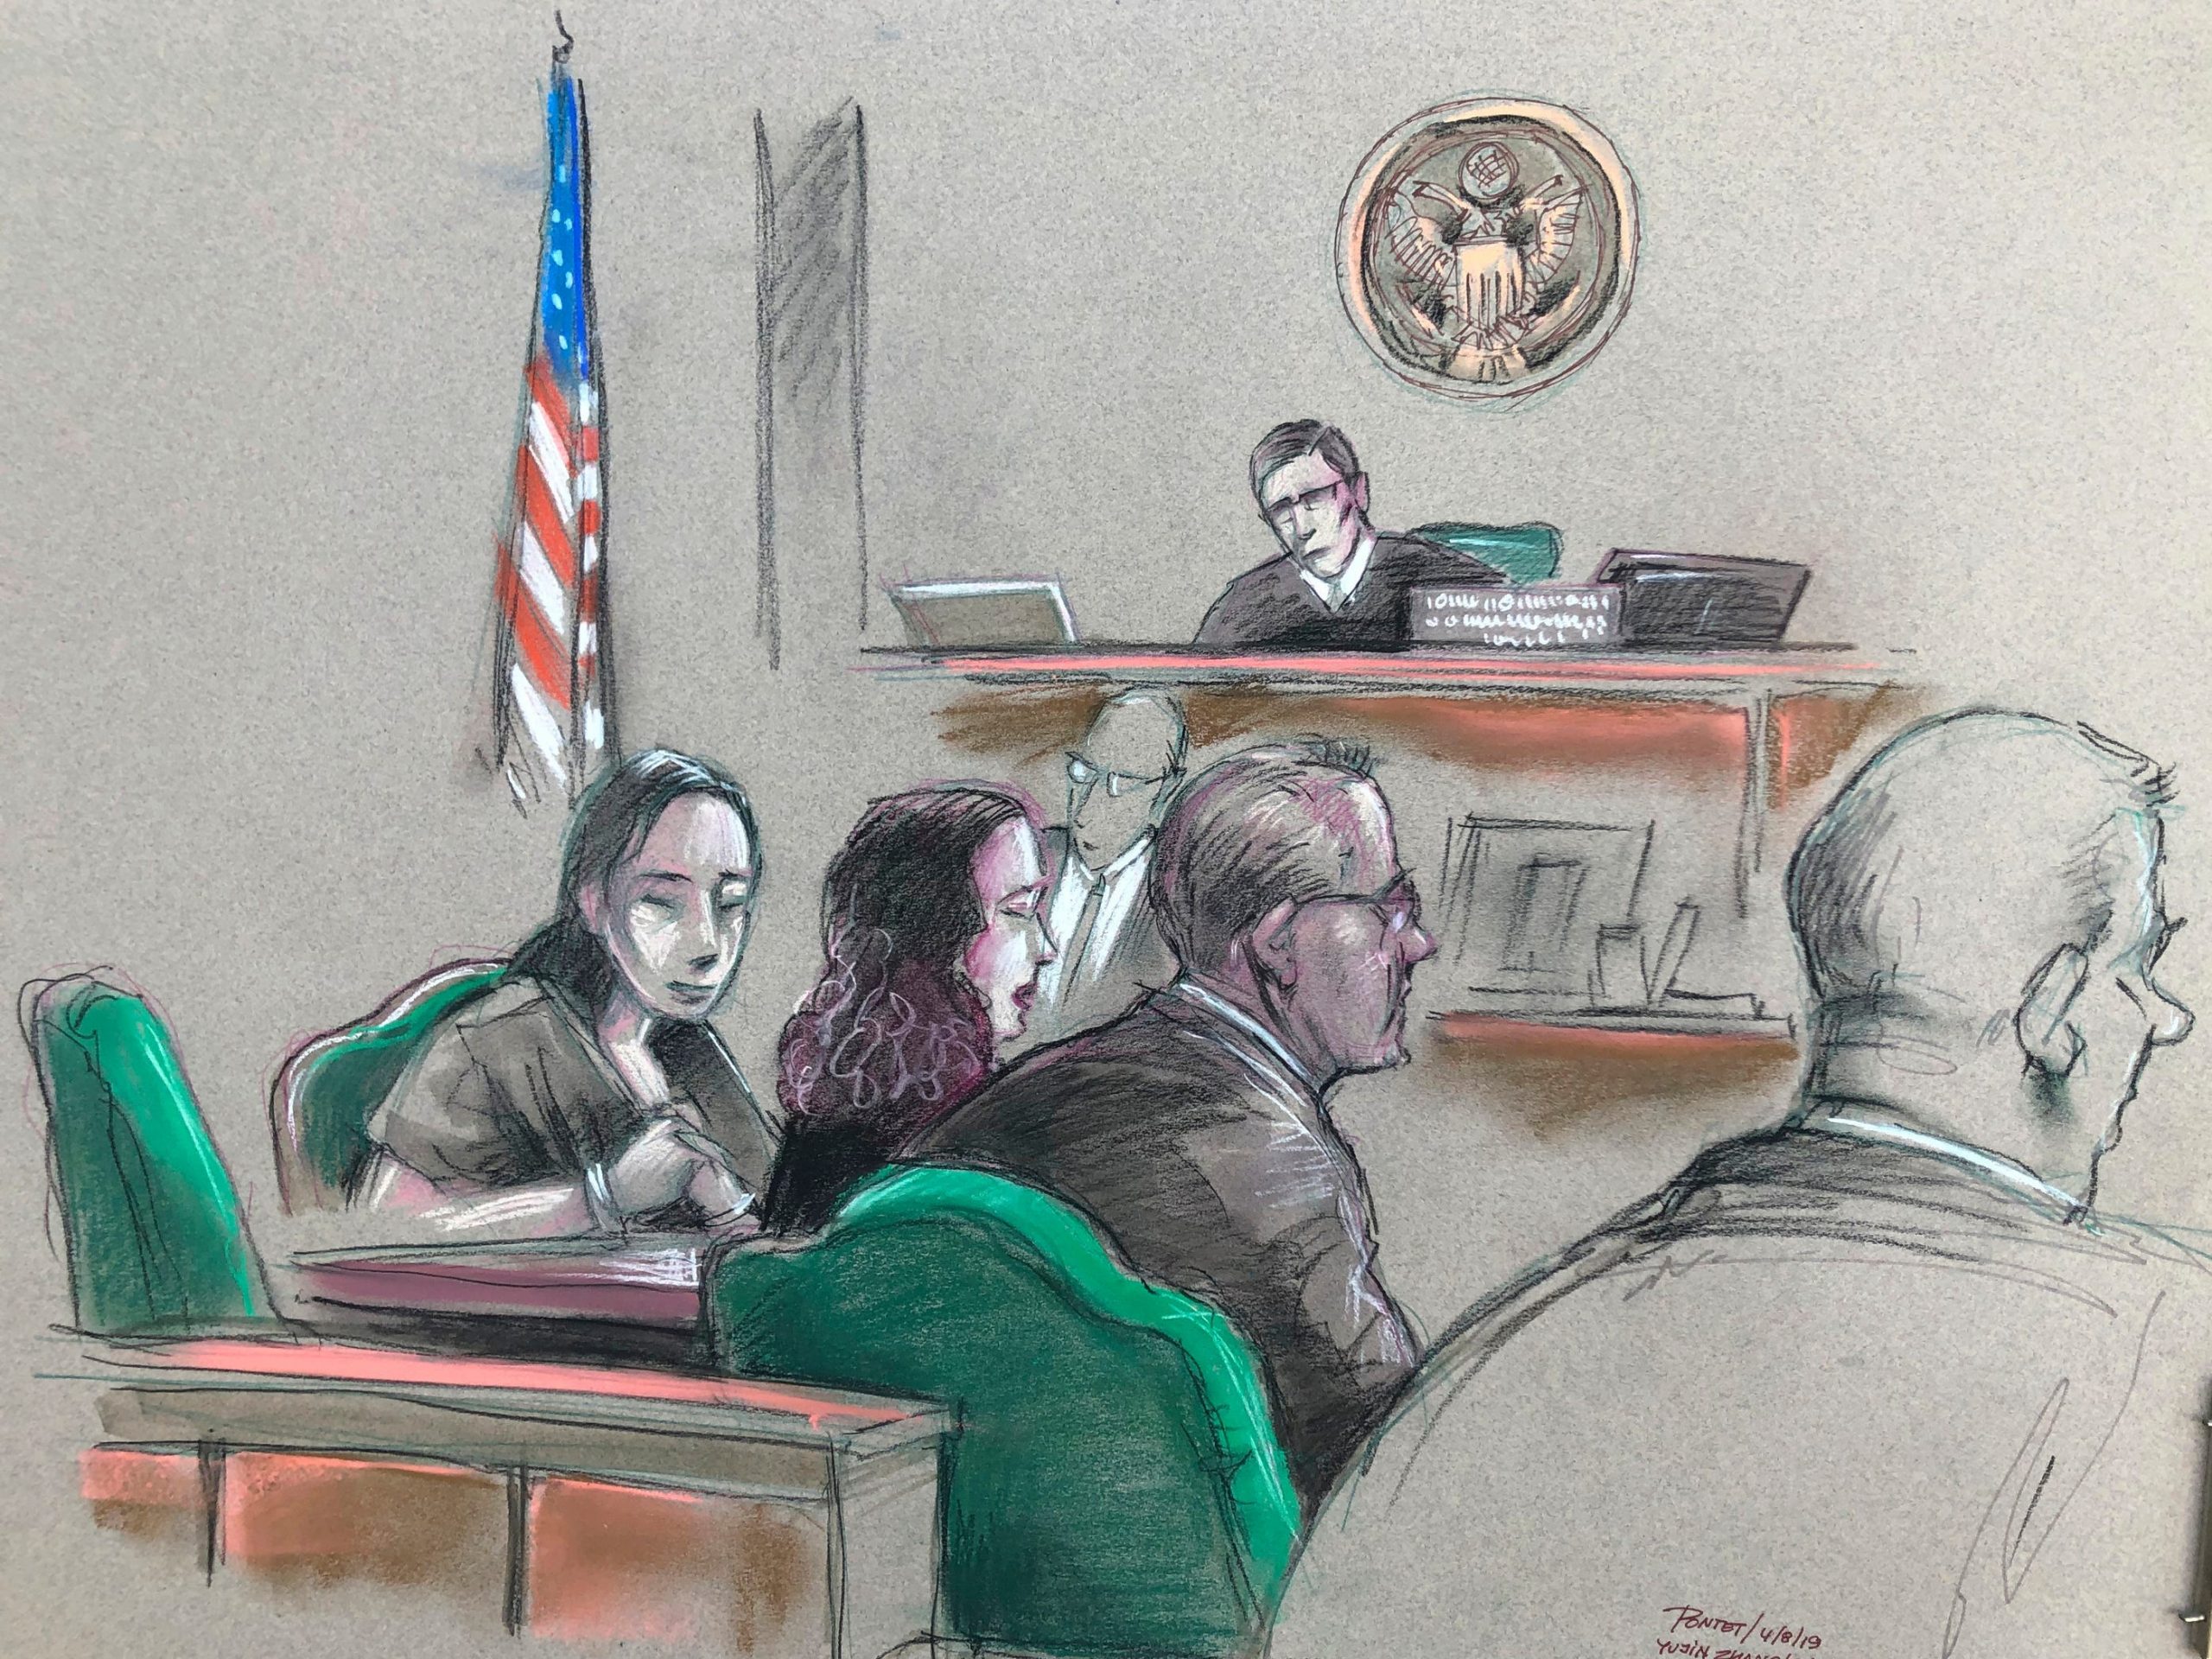 In this artist sketch, a Chinese woman, Yujing Zhang, left, listens to a hearing Monday, April 8, 2019, before federal Magistrate Judge William Matthewman in West Palm Beach, Fla. Secret Service agents arrested the 32-year-old woman March 30 after they say she gained admission by falsely telling a checkpoint she was a member and was going to swim. (Daniel Pontet via AP)